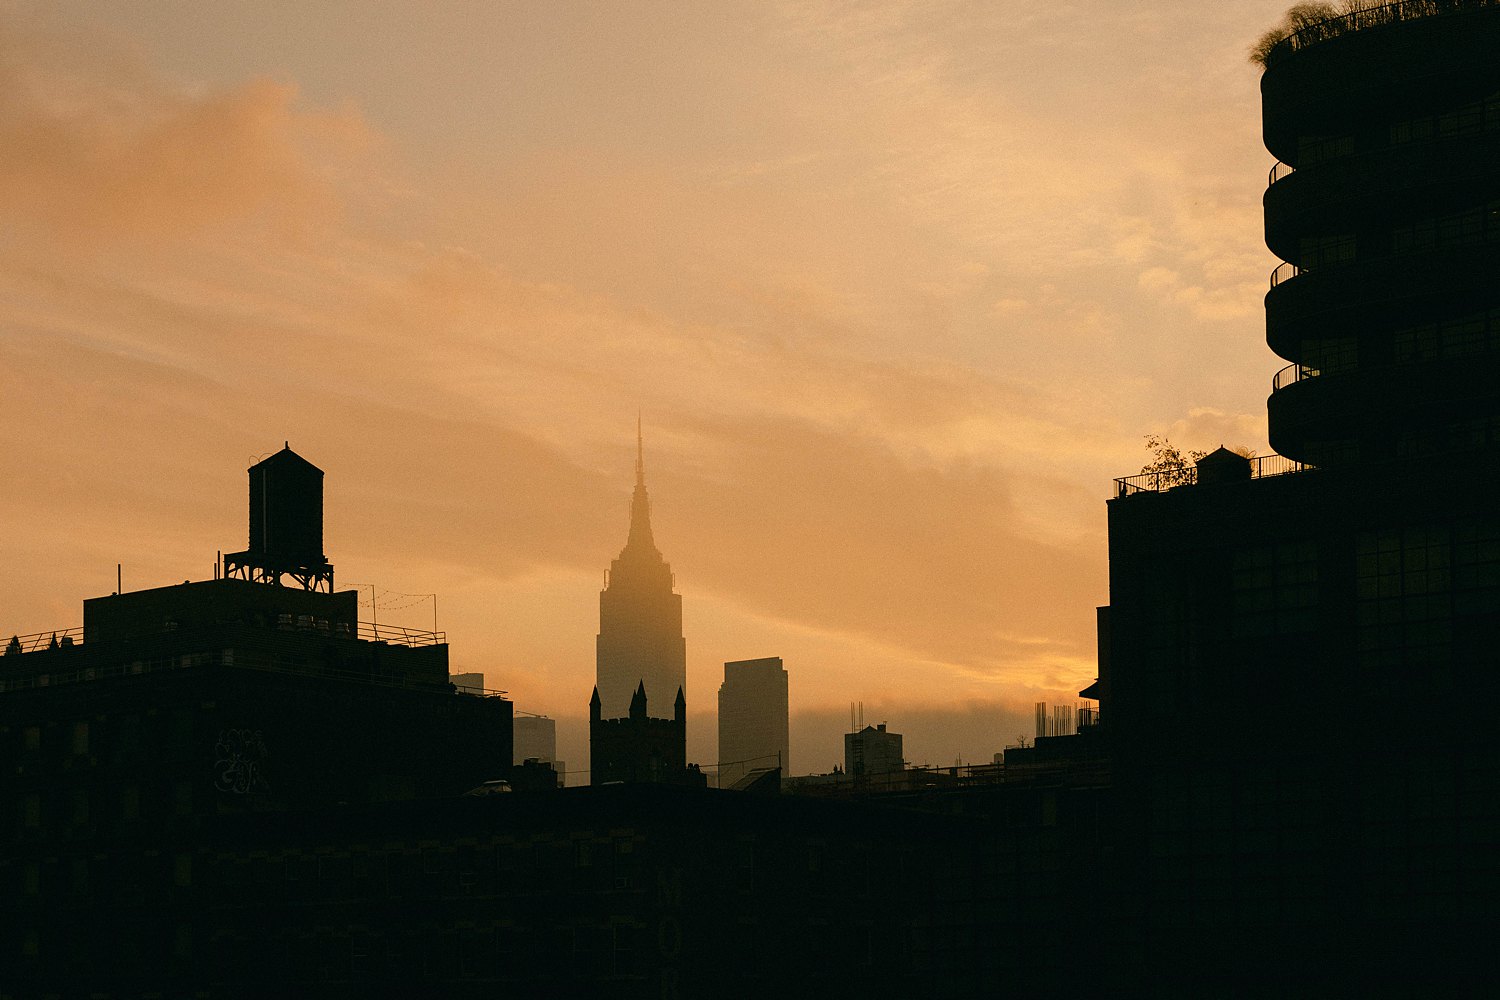 Empire State Building from distance in early morning orange sunrise and fog